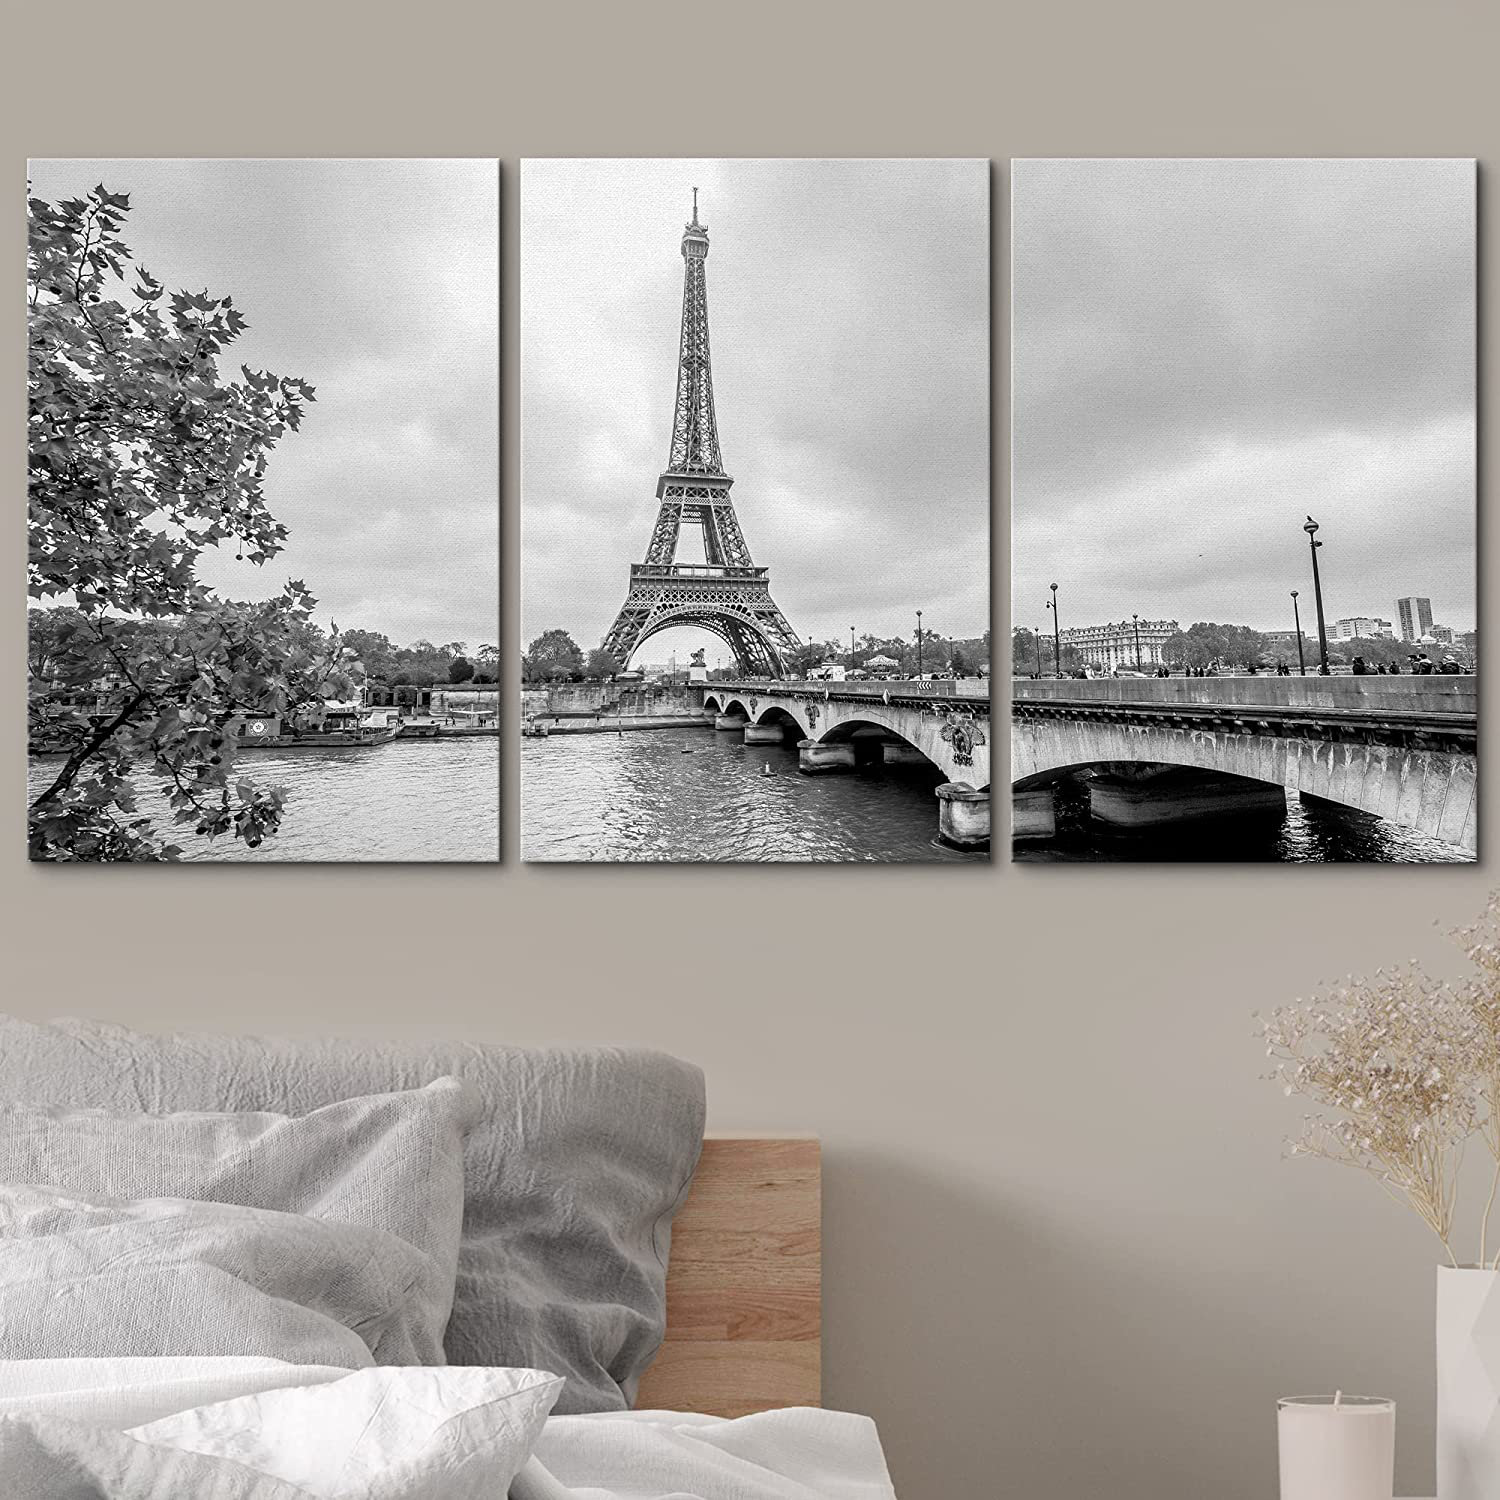 In From Pieces | And 3 Black On Print White Canvas Tower IDEA4WALL Seine. Wayfair Cityscape Paris Eiffel